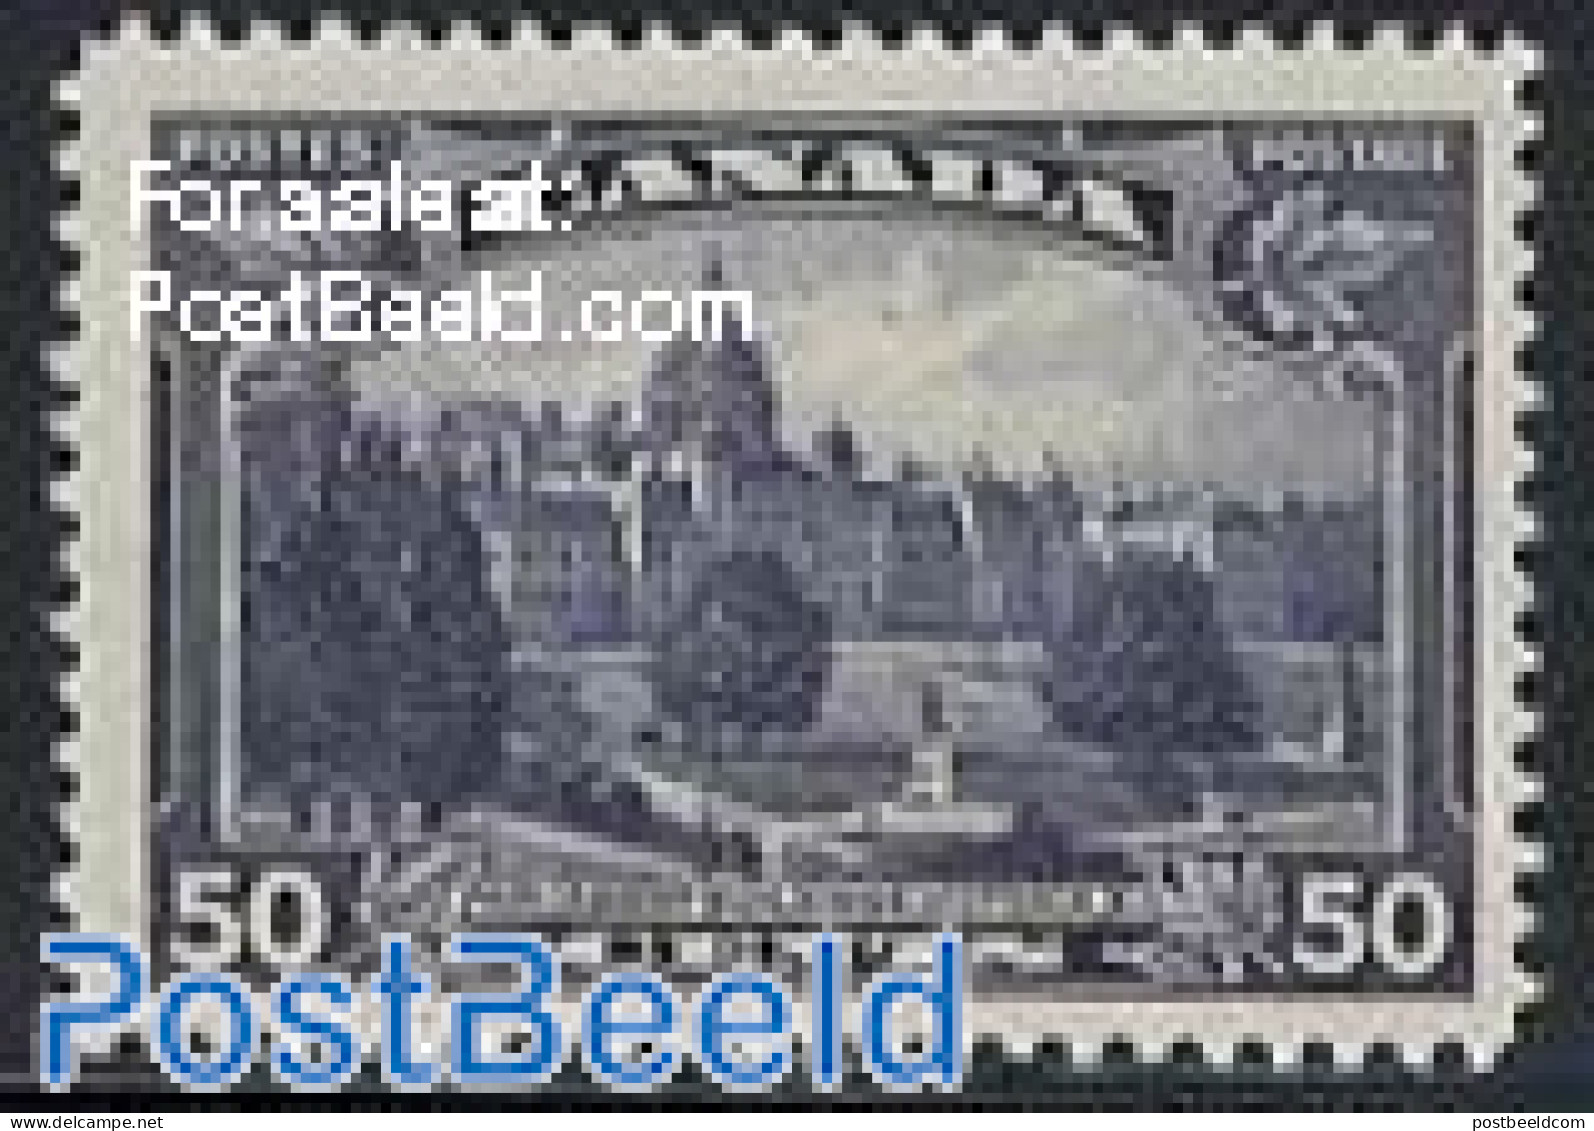 Canada 1935 50c, Stamp Out Of Set, Unused (hinged) - Nuevos